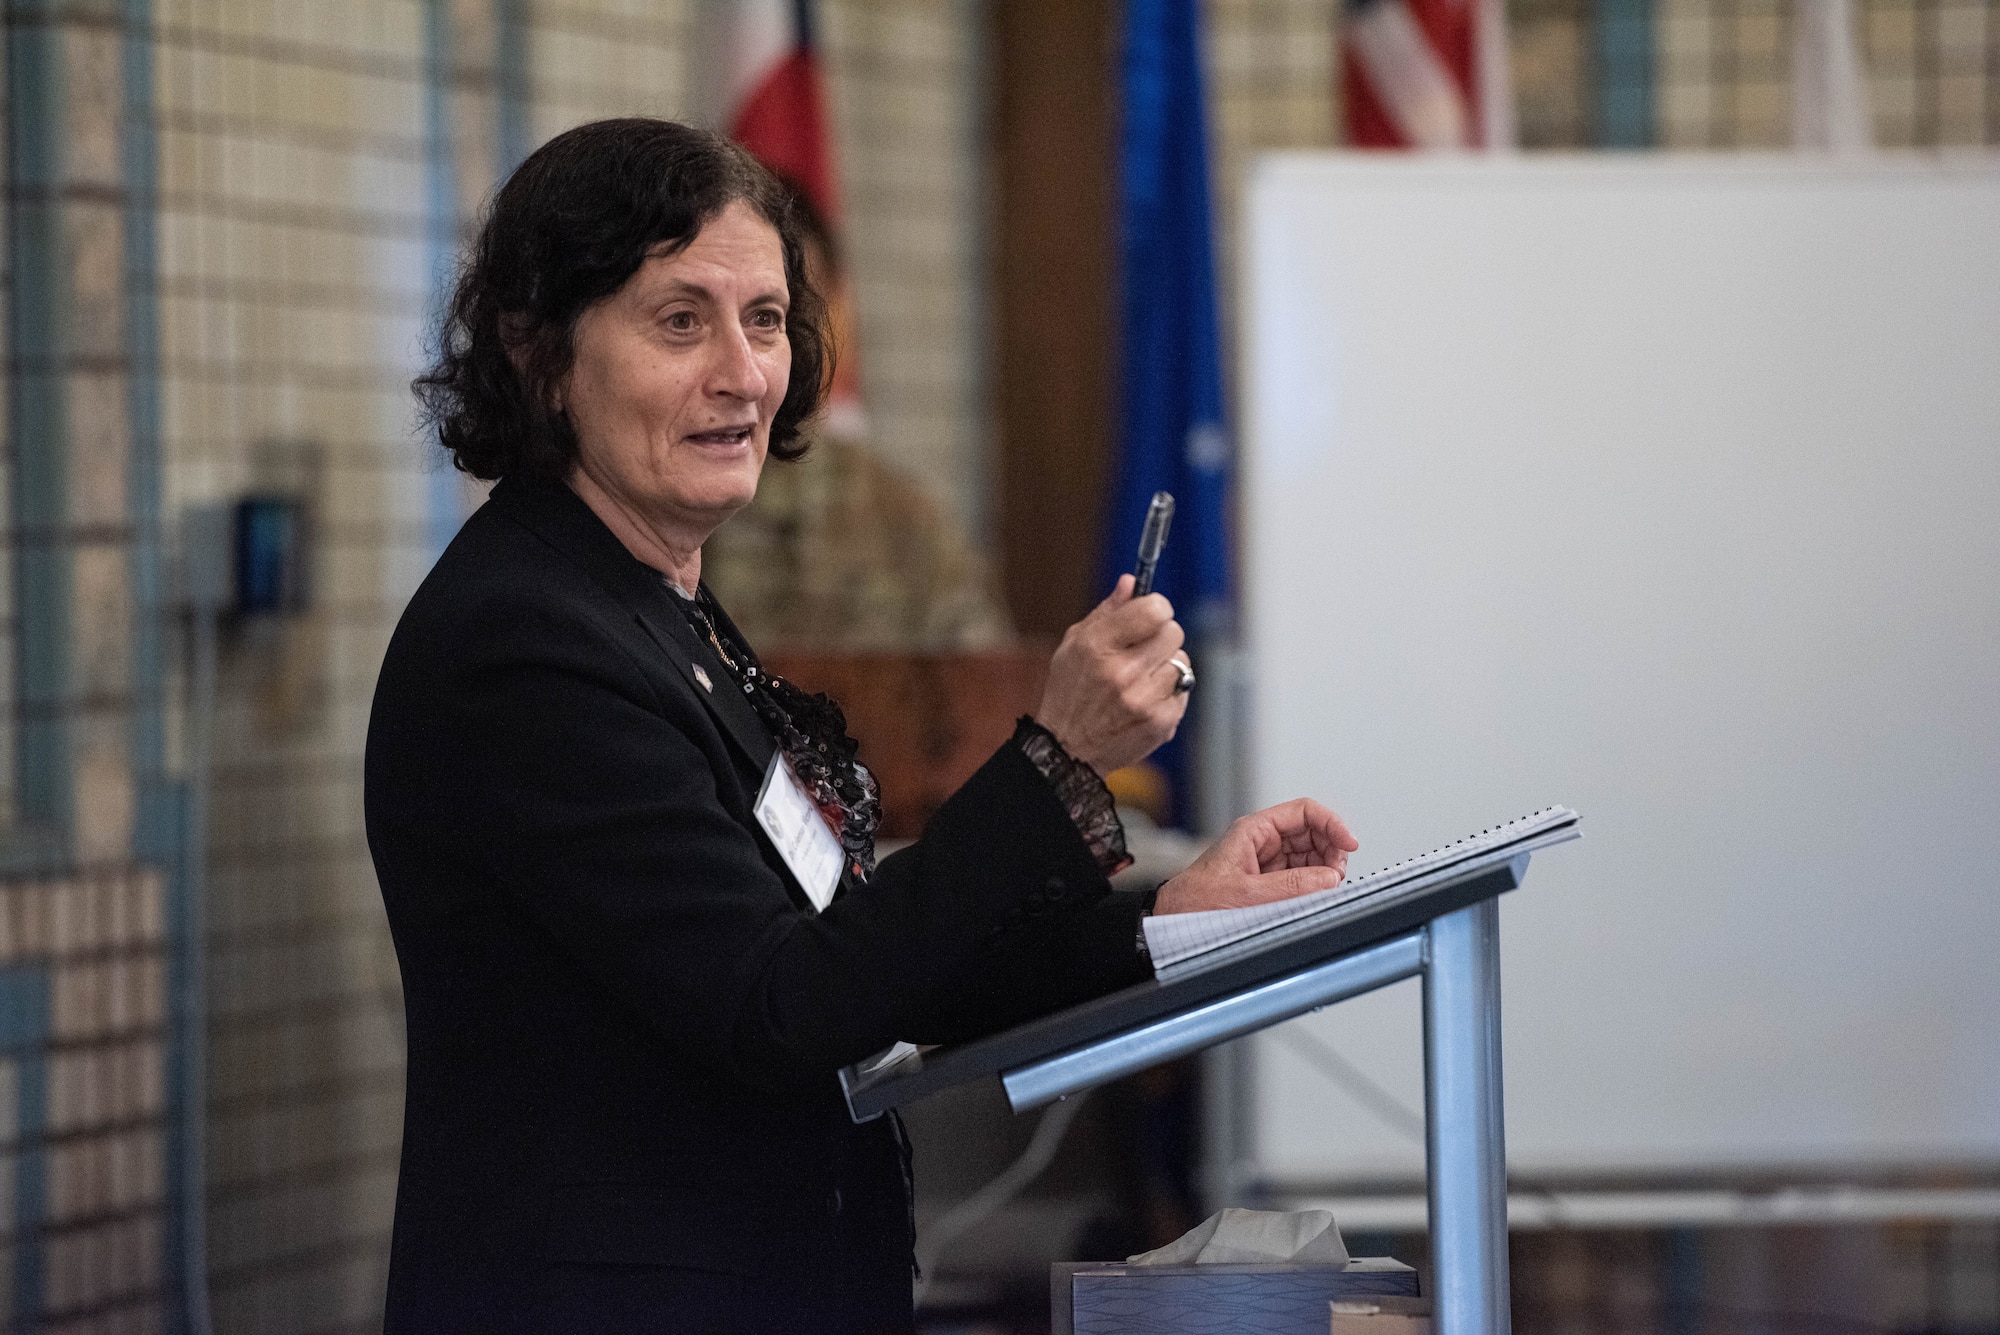 Dr. Victoria Coleman, chief scientist, Department of the Air Force, speaks to the audience at the 2021 USSF Space Futures Work in Colorado Springs, Colo., June 2, 2021. Coleman serves as the chief scientific adviser to the Secretary of the Air Force, Air Force Chief of Staff, and Chief of Space Operations. She provides assessments on a wide range of scientific and technical issues affecting the department’s mission.